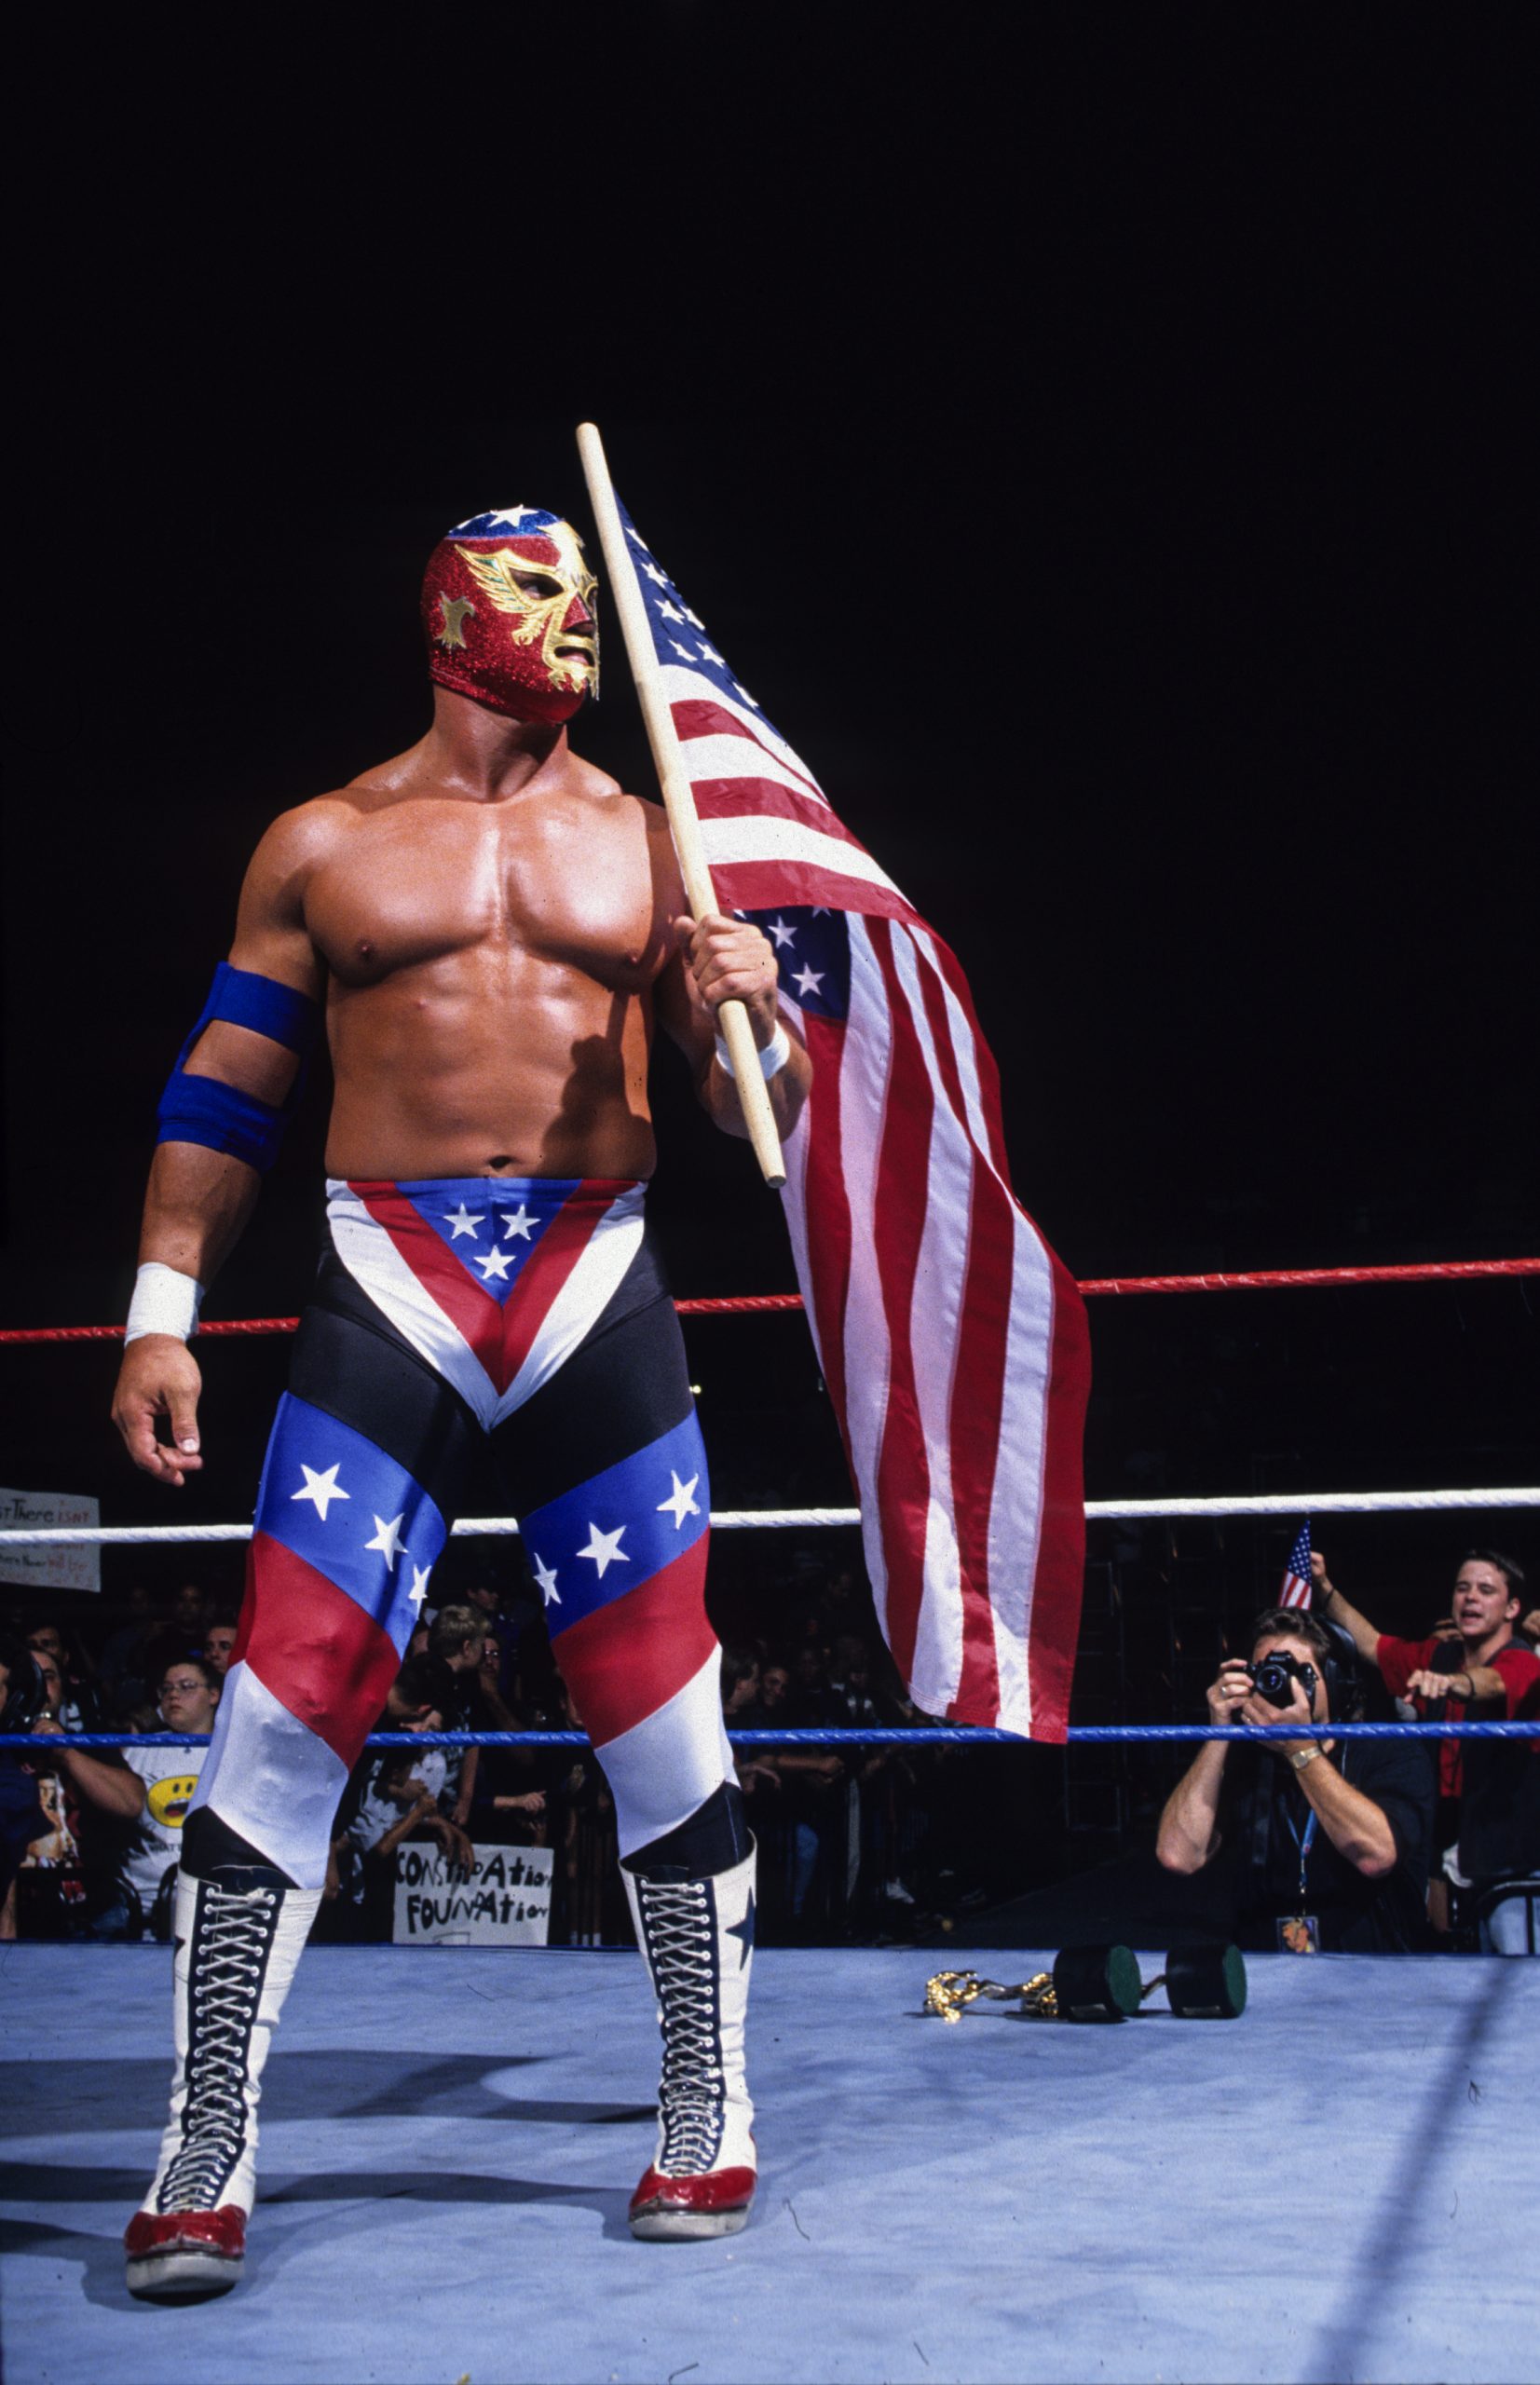 Global Wrestling Federation fans learned in the 1980s that Del Wilkes’ character, “The Patriot,” was much more than just a flag waver. Del put his deep, booming voice to great use on the microphone, speaking eloquently and passionately about his love for his country. His chiseled 6-foot-2-inch, 275-pound figure certainly looked the part of a larger-than-life professional wrestler. 
 Photography courtesy of WWE